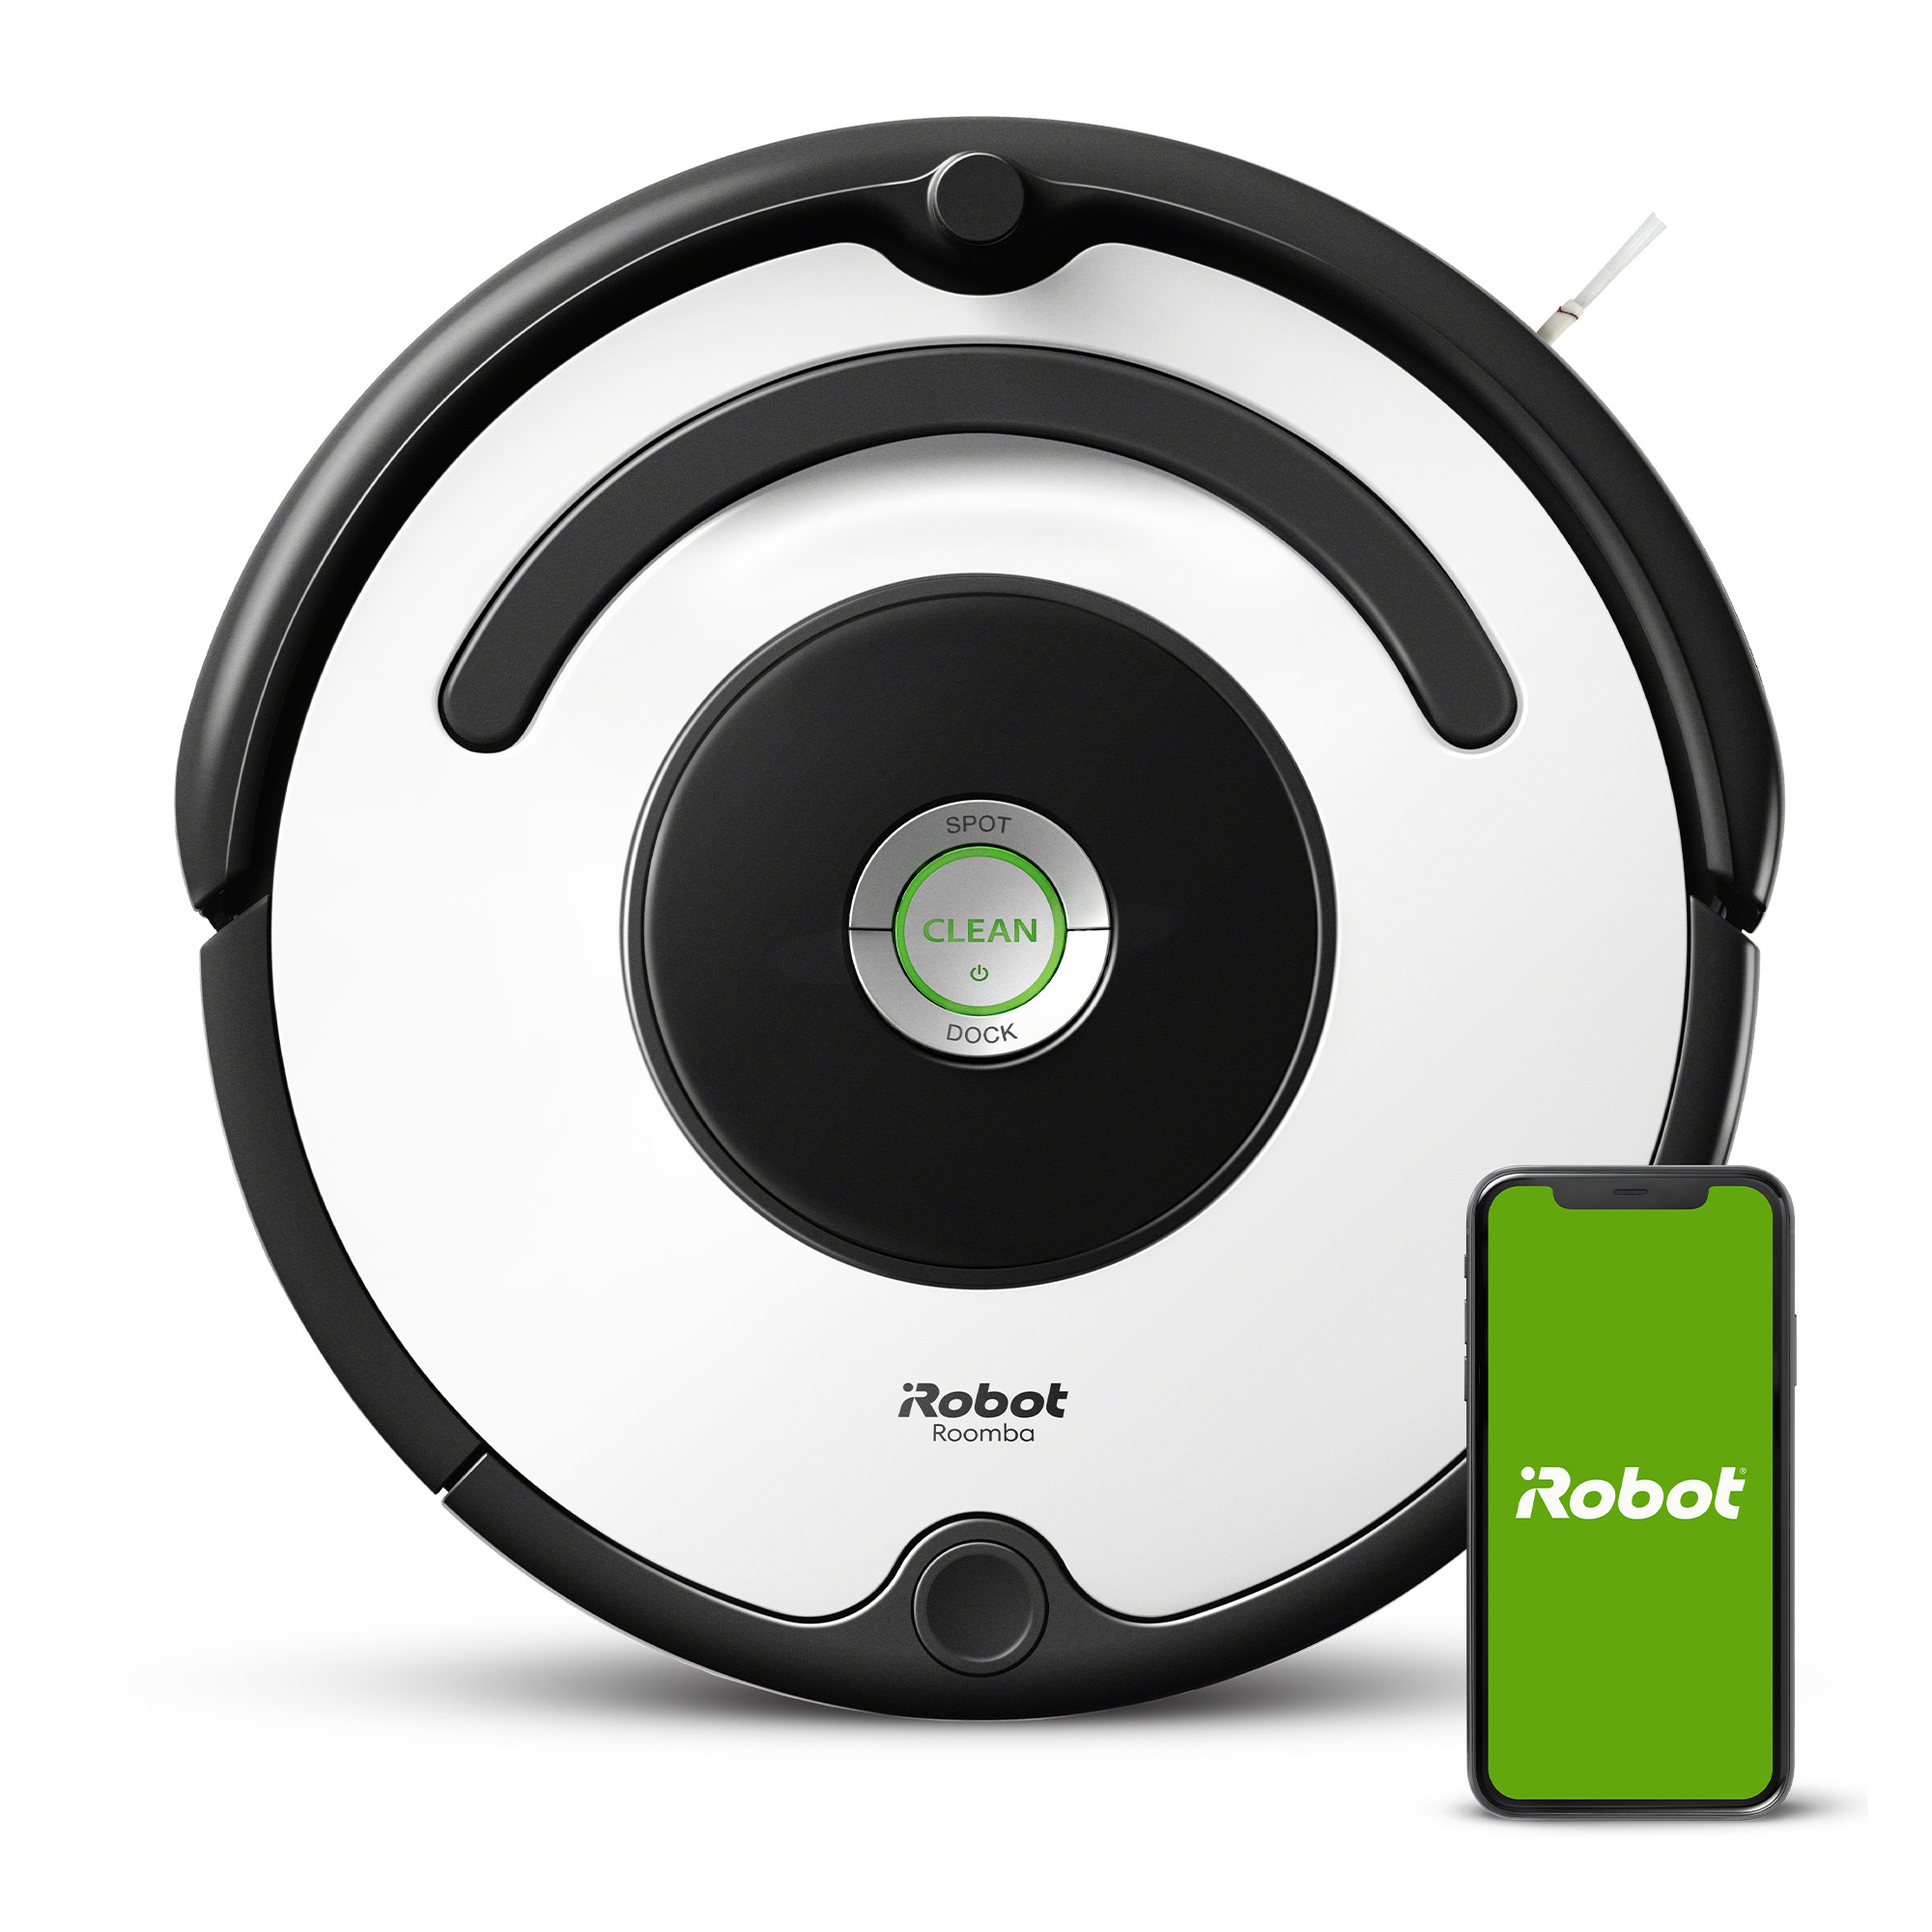 iRobot Roomba 670 Robot Vacuum-Wi-Fi Connectivity, Works with Google Home, Good for Pet Hair, Carpets, Hard Floors, Self-Charging - image 1 of 12